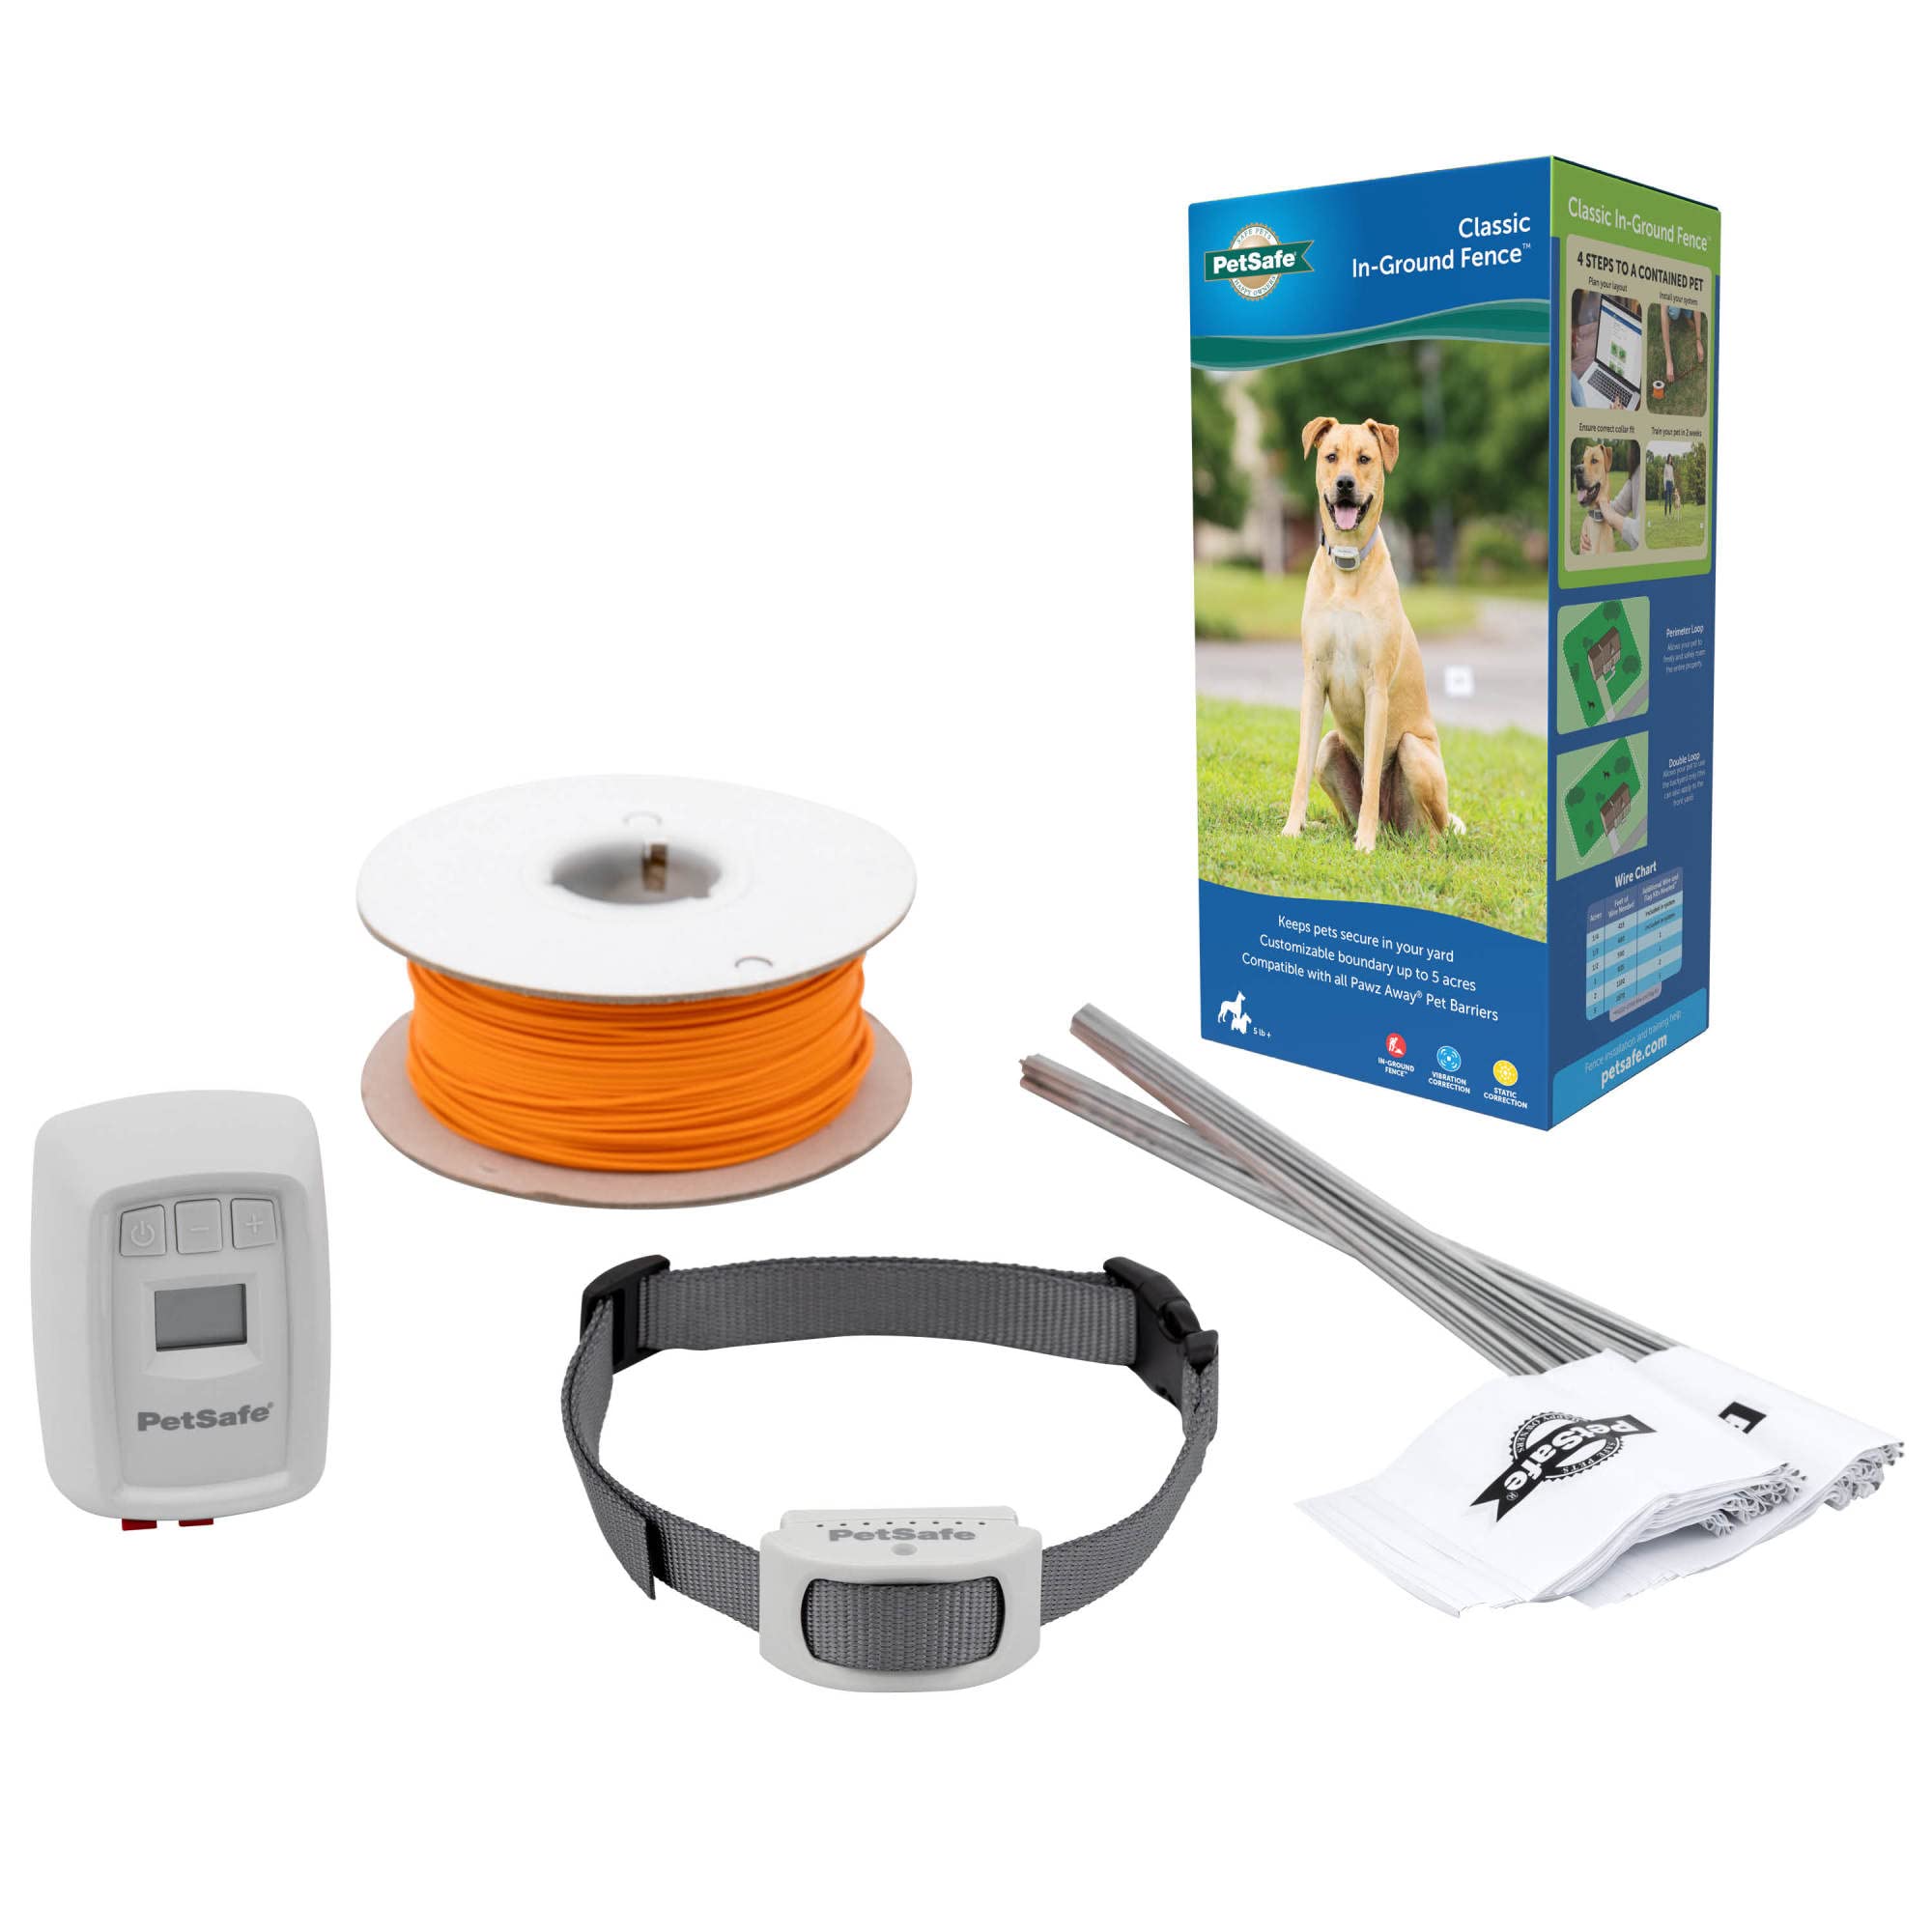 PetSafe Classic In-Ground Fence Rechargeable Receiver Collar for Dogs and  Cats - from The Parent Company of Invisible Fence Brand - 7 Levels of